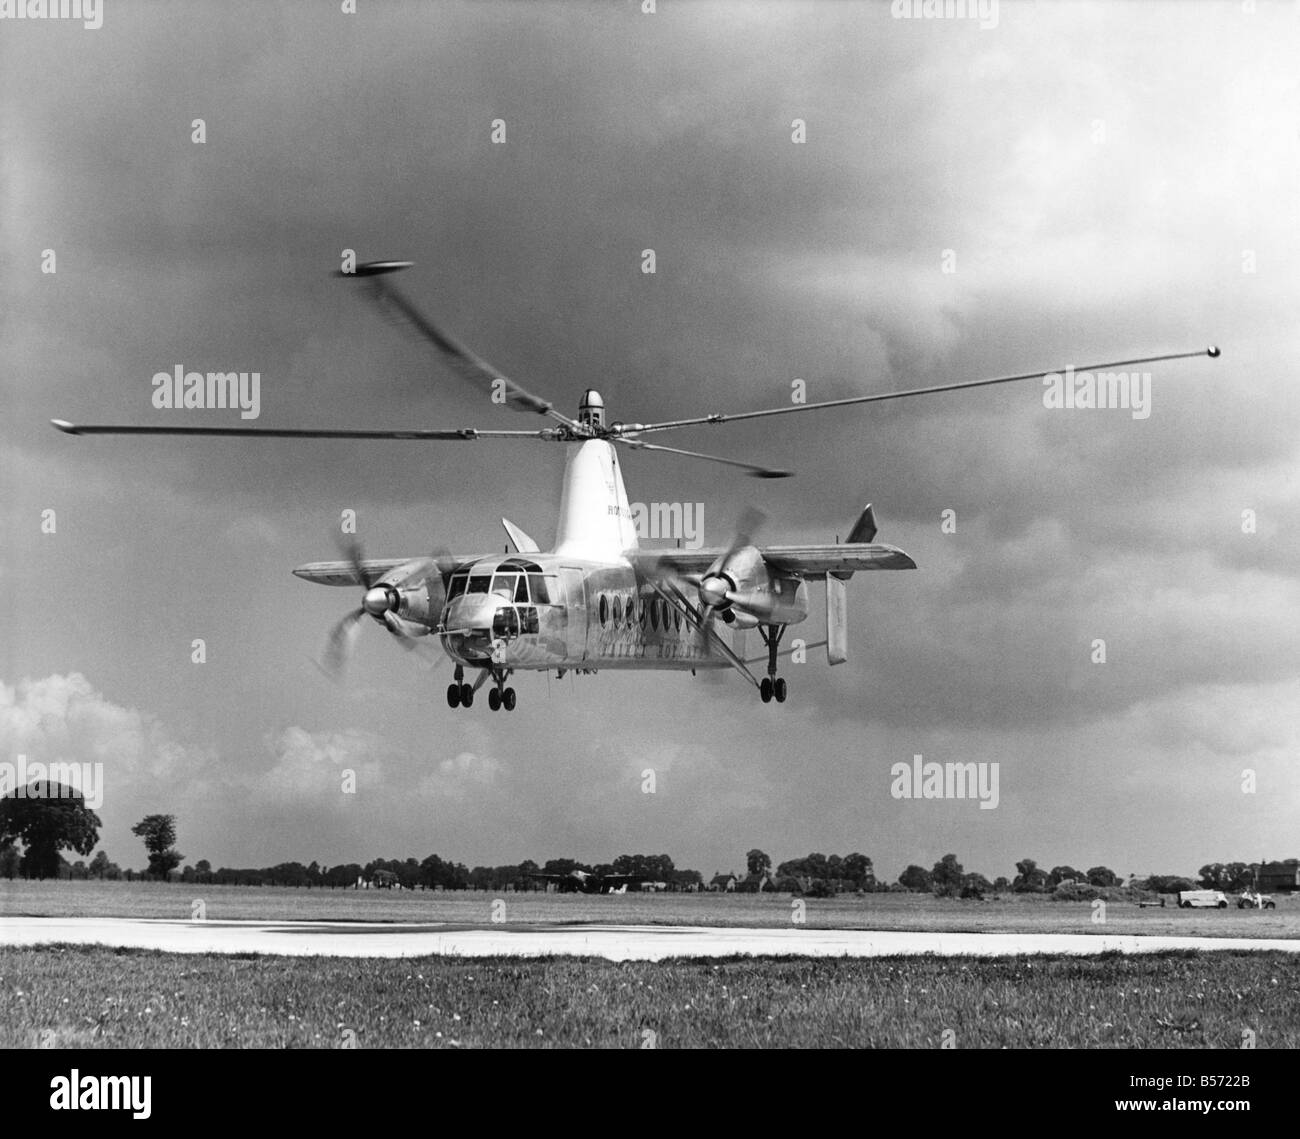 The world's first vertical take-off airliner, the British Fairey Rotodyne, was demonstrated today at White Waltham Airfield where it is seen here in flight. ;June 1958 ;P004259 Stock Photo